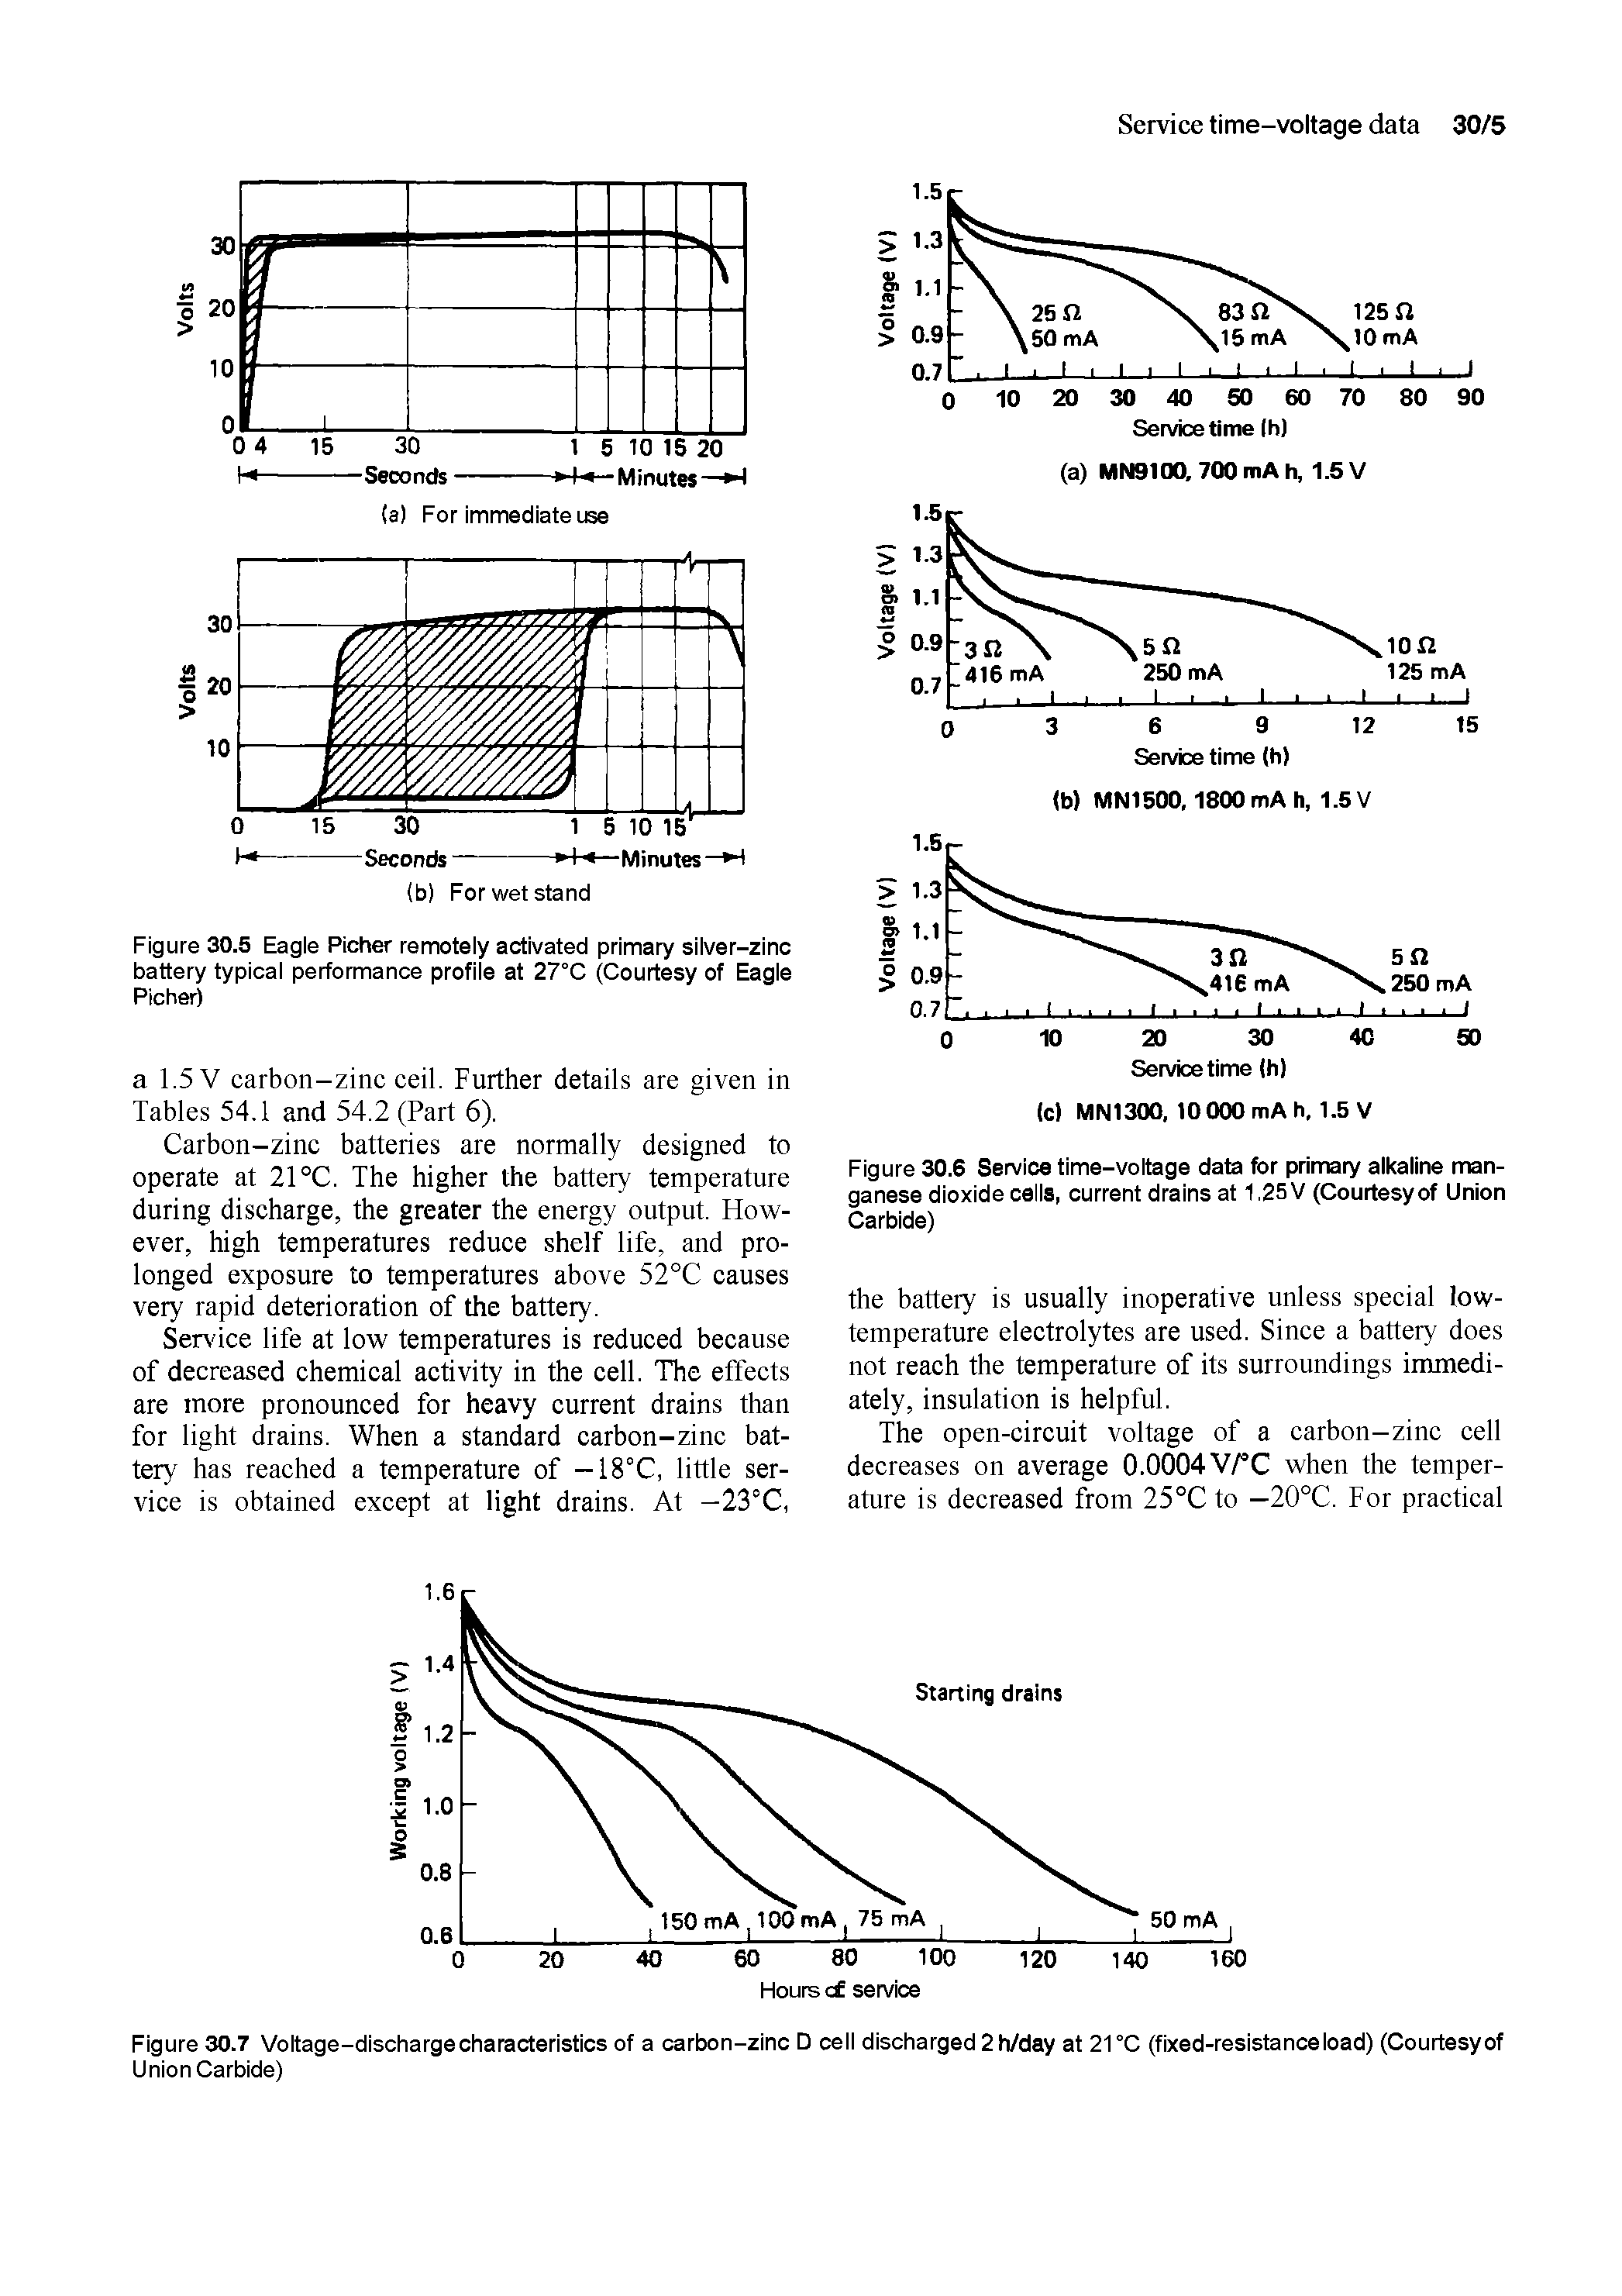 Figure 30.7 Voltage-discharge characteristics of a carbon-zinc D cell discharged 2 h/day at 21 °C (fixed-resistance load) (Courtesy of Union Carbide)...